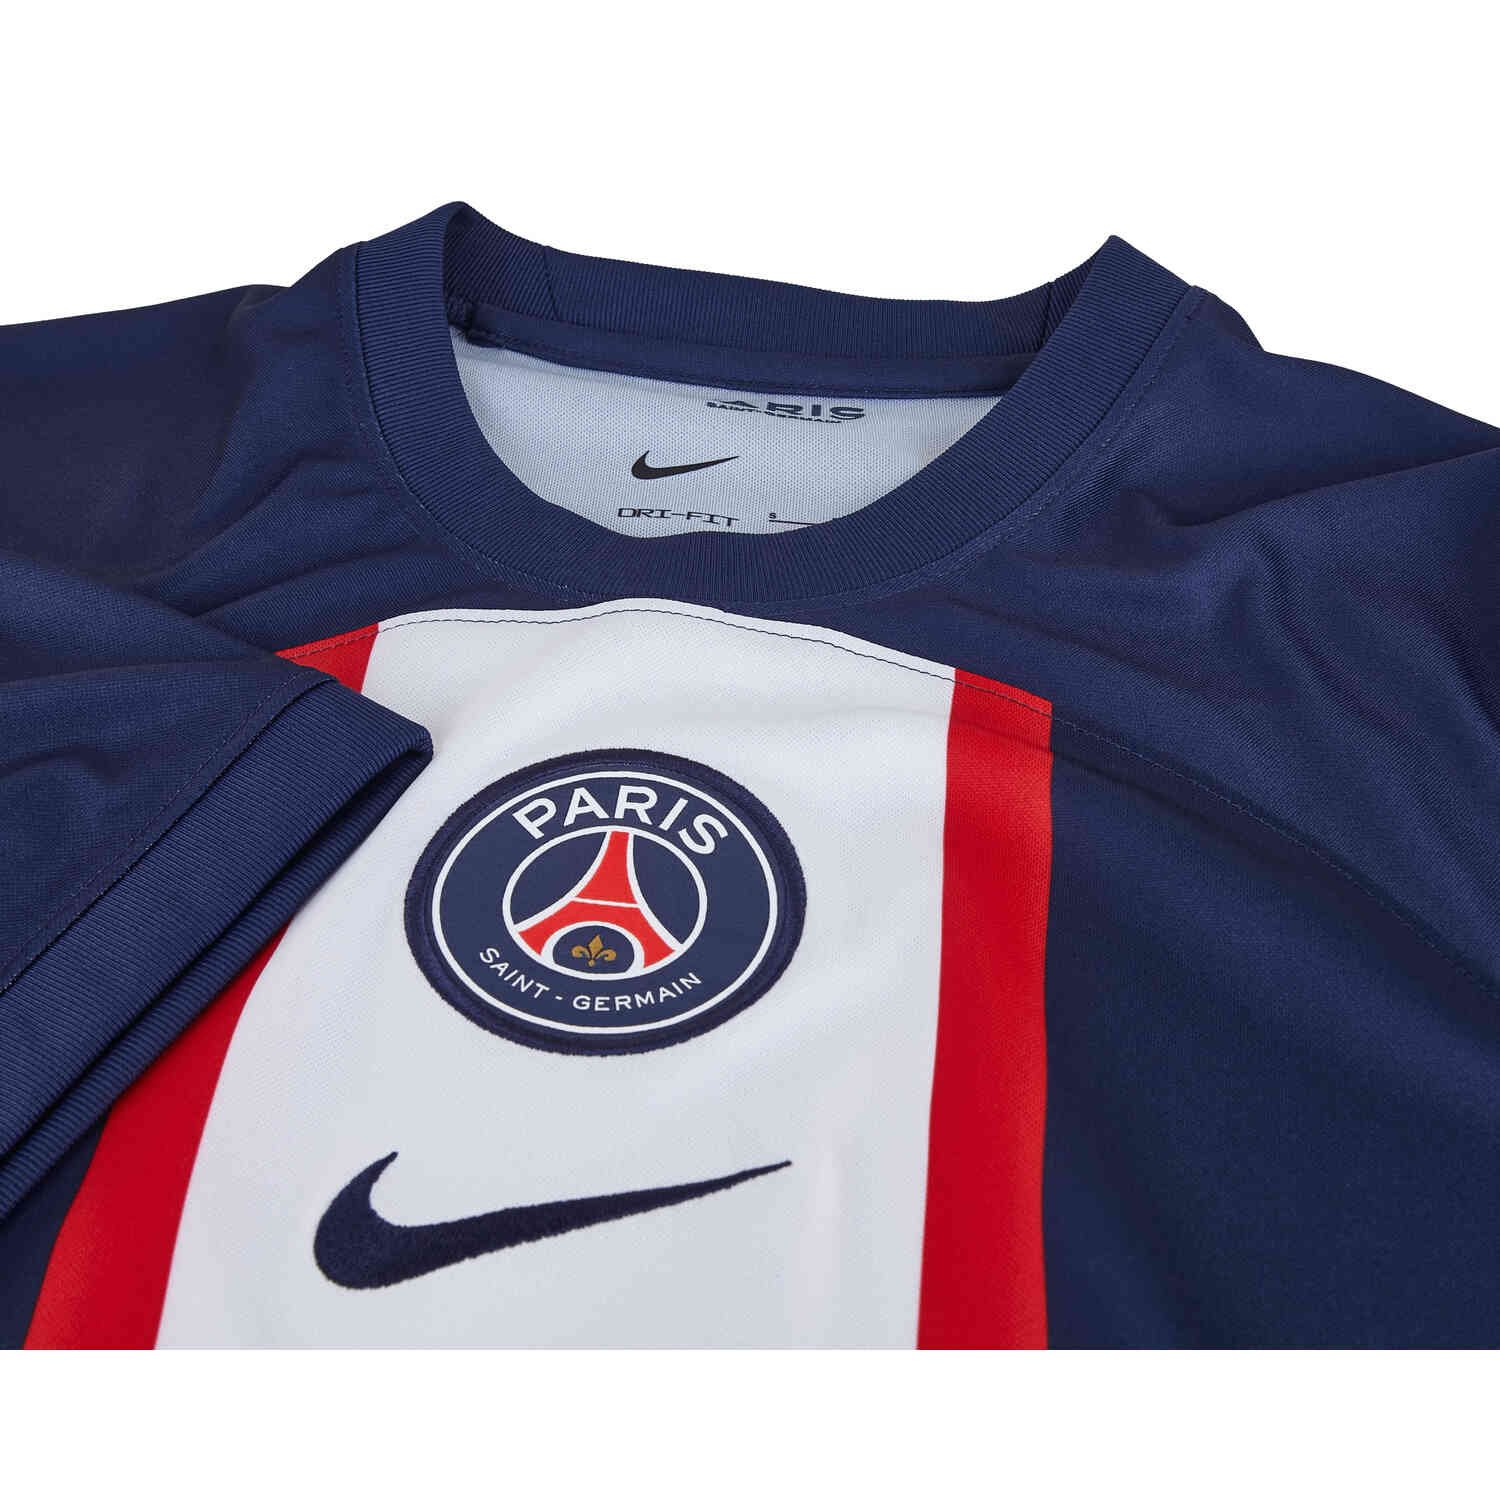 NIKE Lionel Messi PSG Jersey T-Shirt Size XL (White) NEW